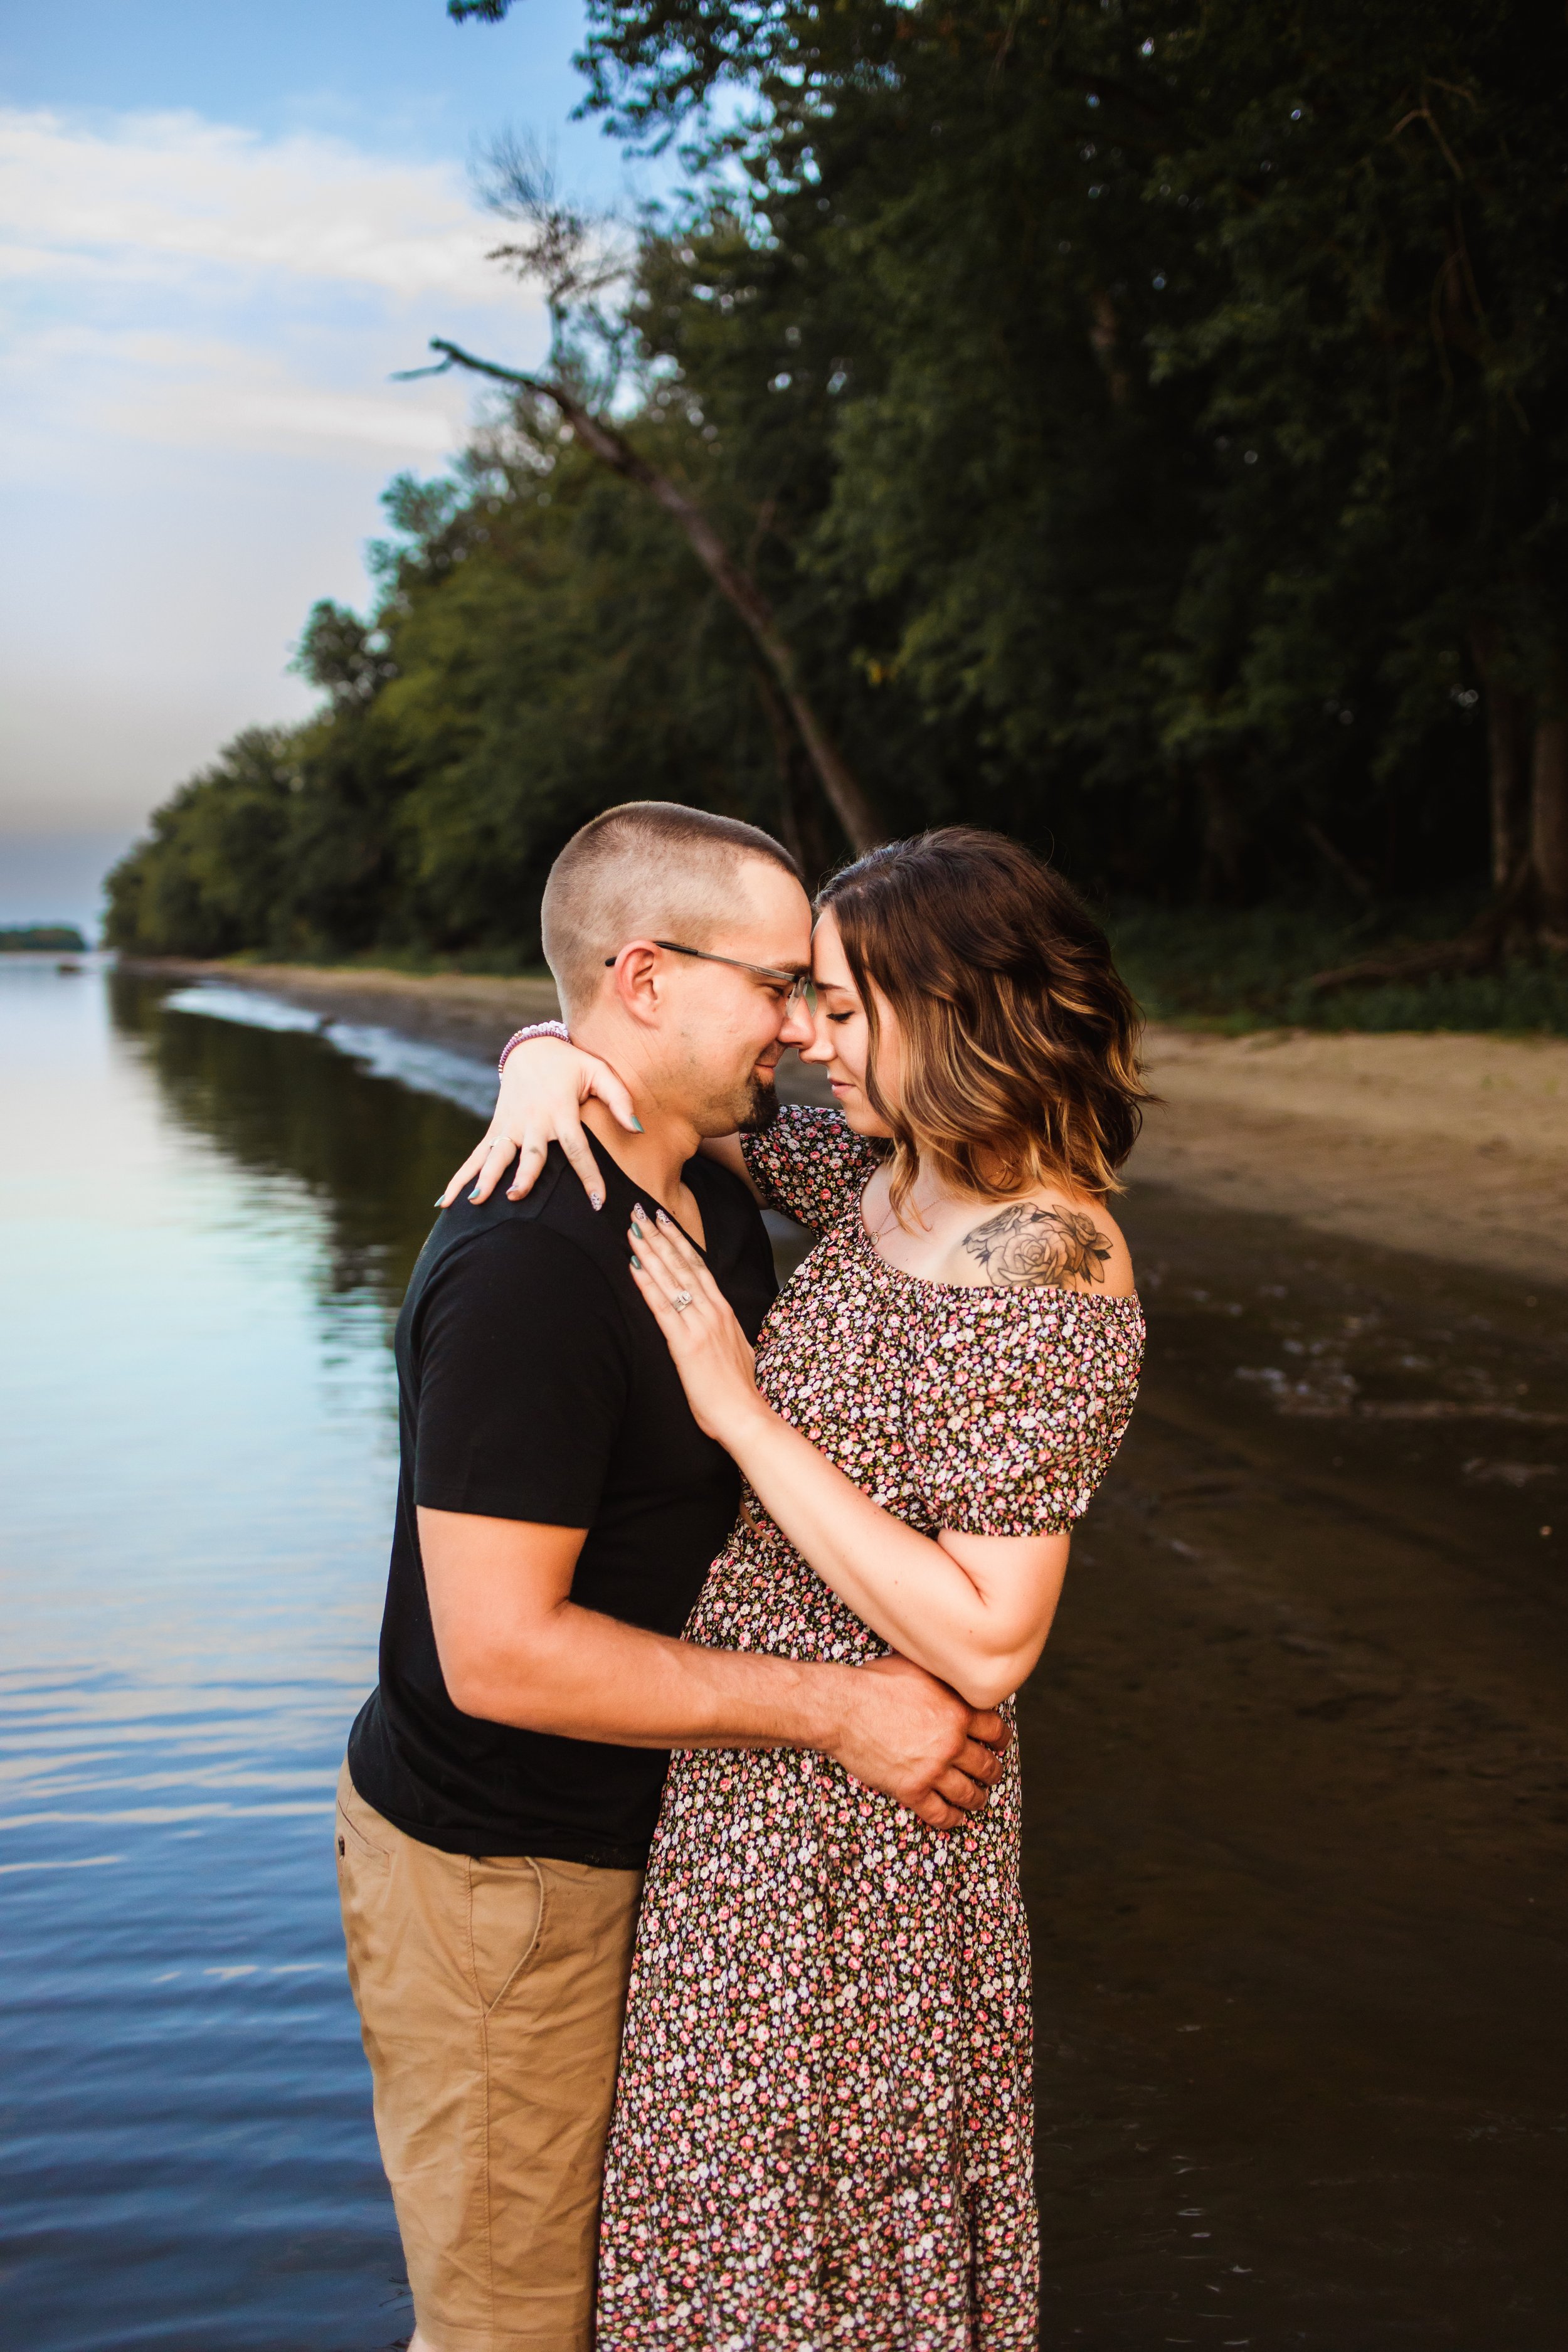  A husband and wife embrace while standing in the Illinois River at dusk by Teala Ward Photography. Couple in love portrait #TealaWardPhotography #TealaWardFamilies #IllinoisRiverPhotography #IllinoisFamilyPhotography #familylifestylepics 